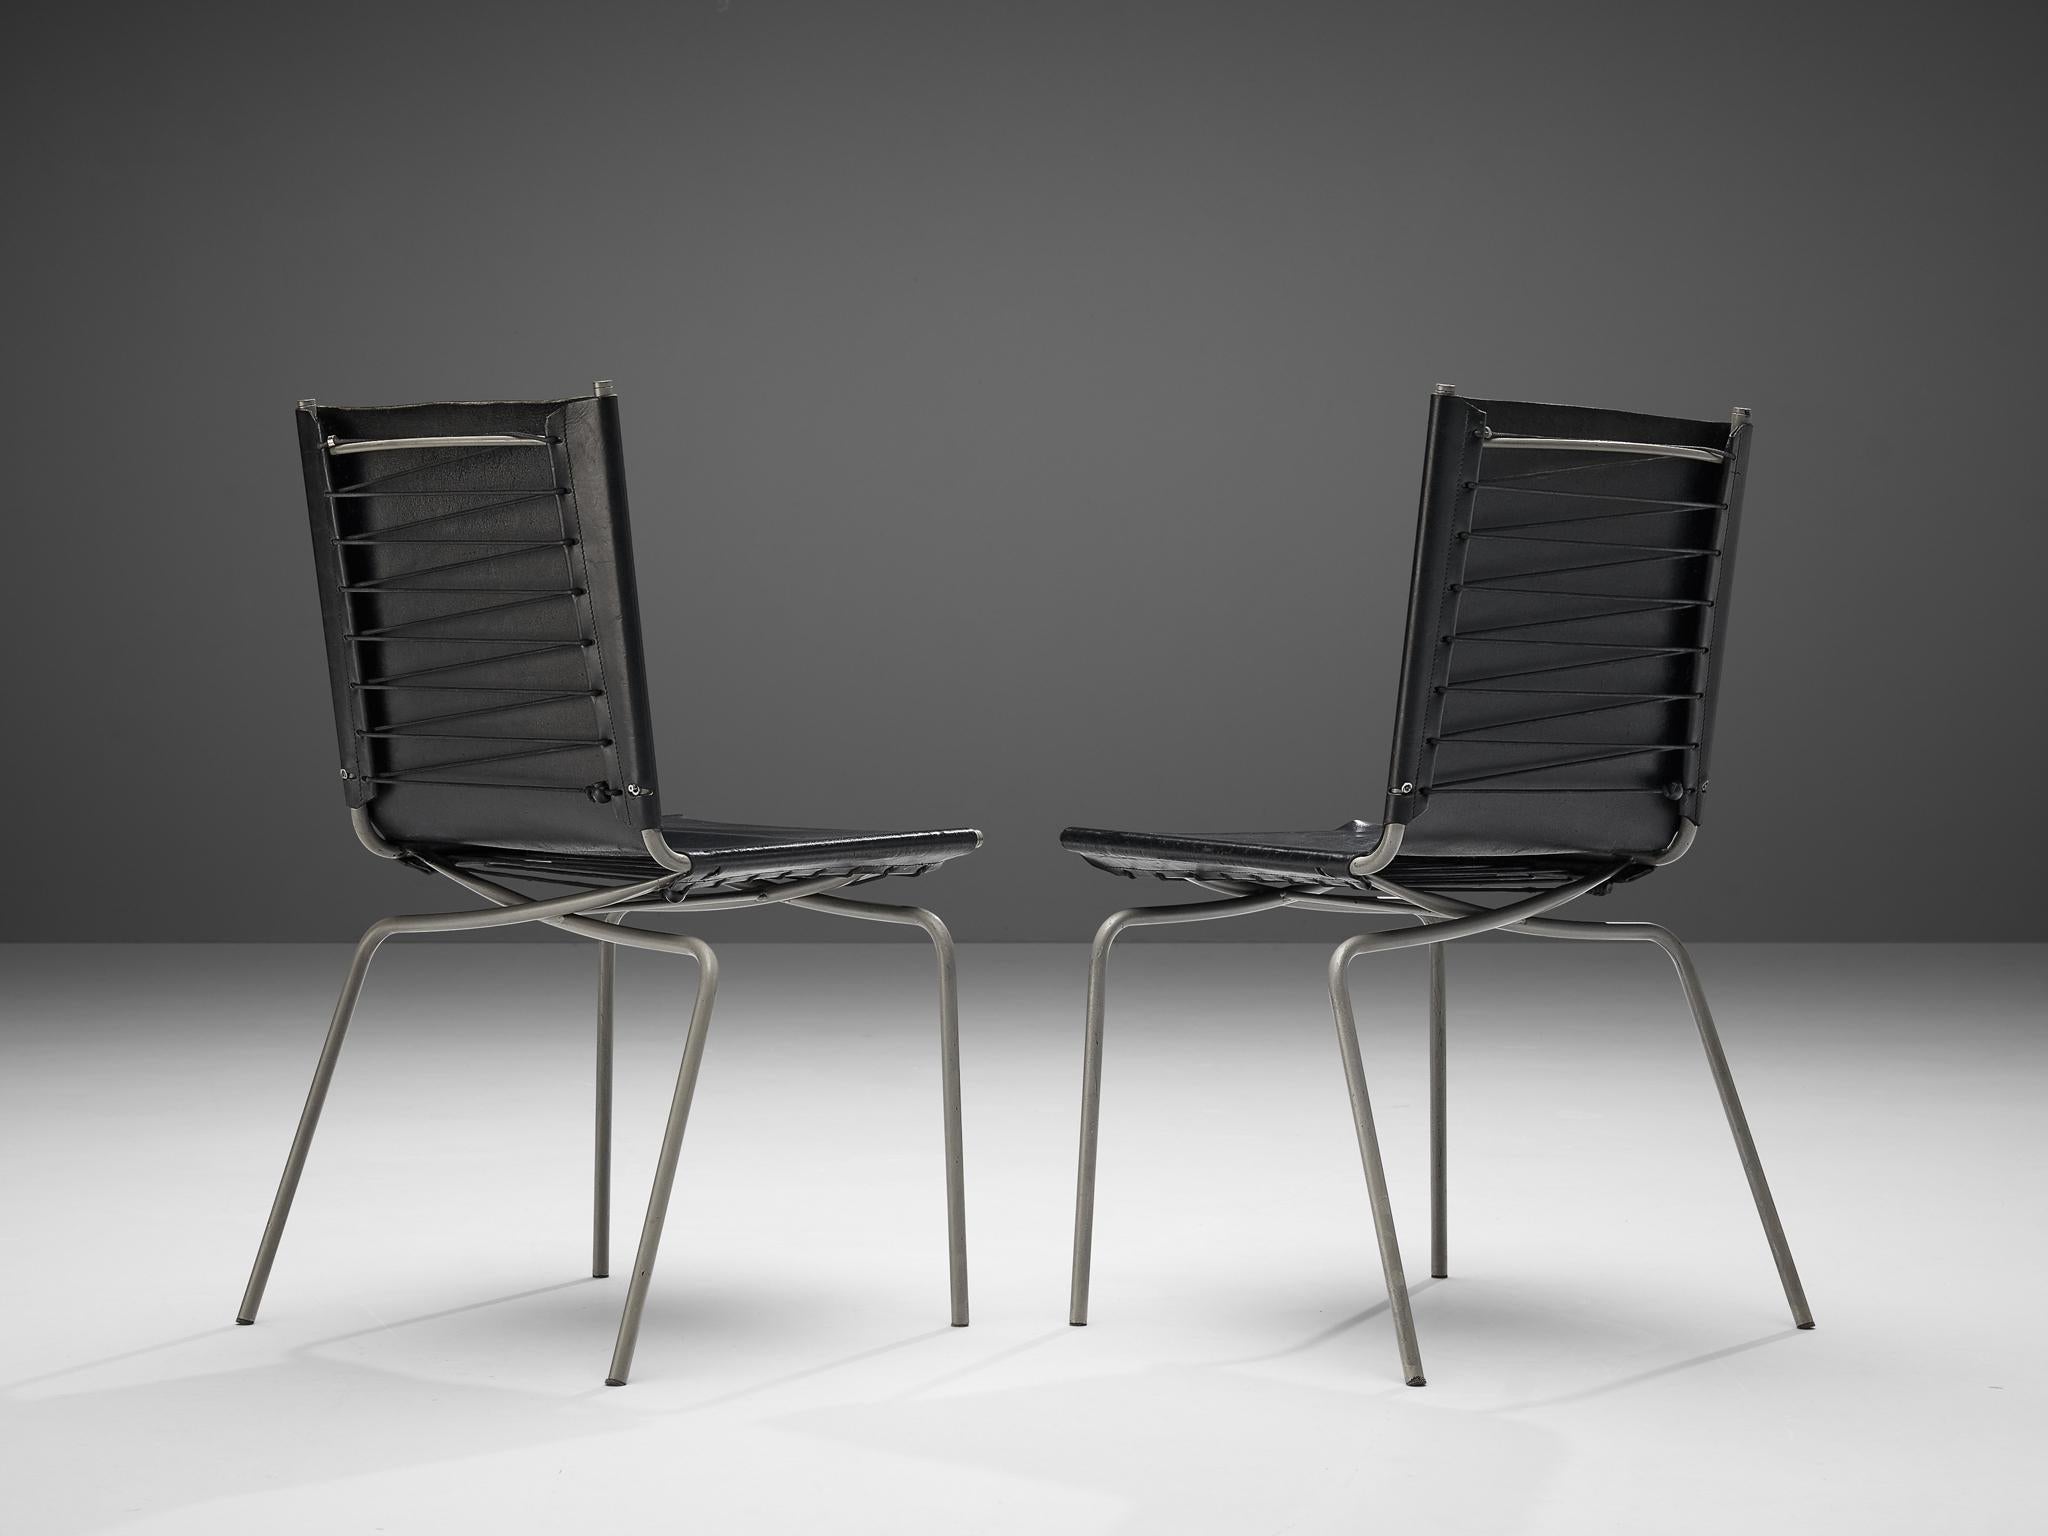 Fabiaan Van Severen, dining chairs, patinated black leather, tubular steel, lace, Belgium, 1997.

Distinct pair of dining chairs by Belgium designer Fabiaan Van Severen. Created in 1997, this design features a patinated leather seat and backrest